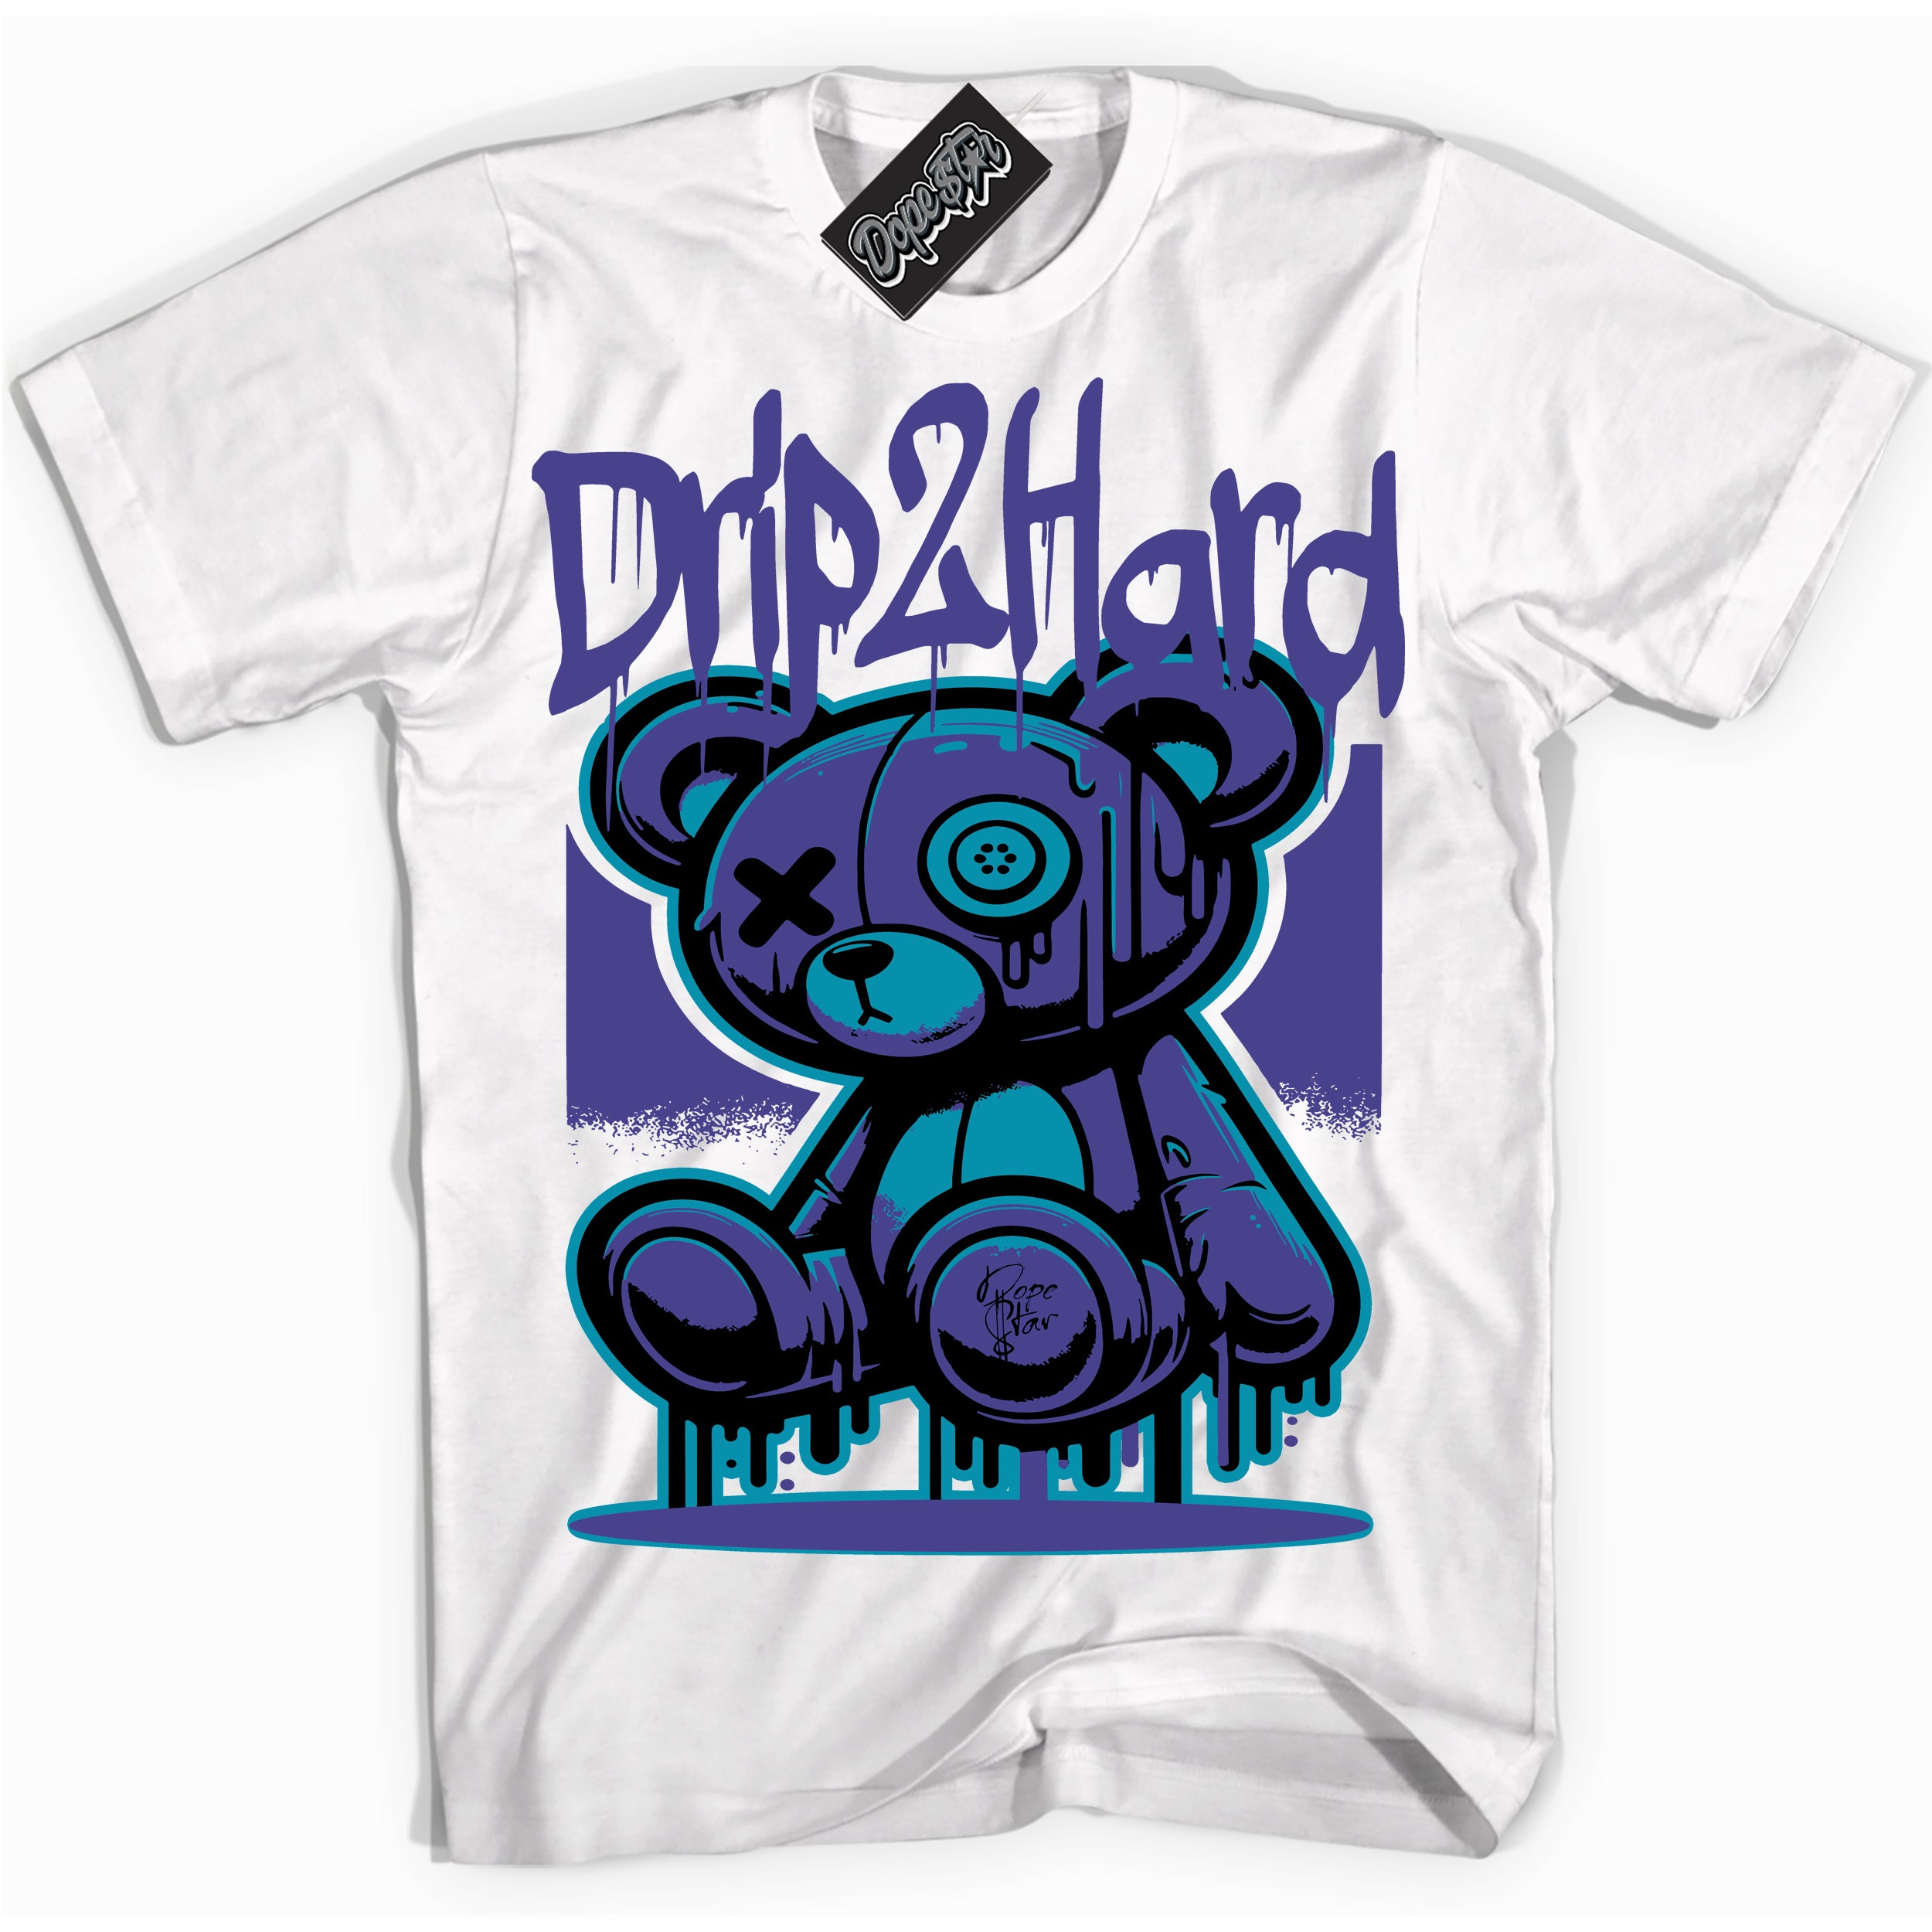 Cool White graphic tee with “ Drip 2 Hard ” design, that perfectly matches Aqua 6s